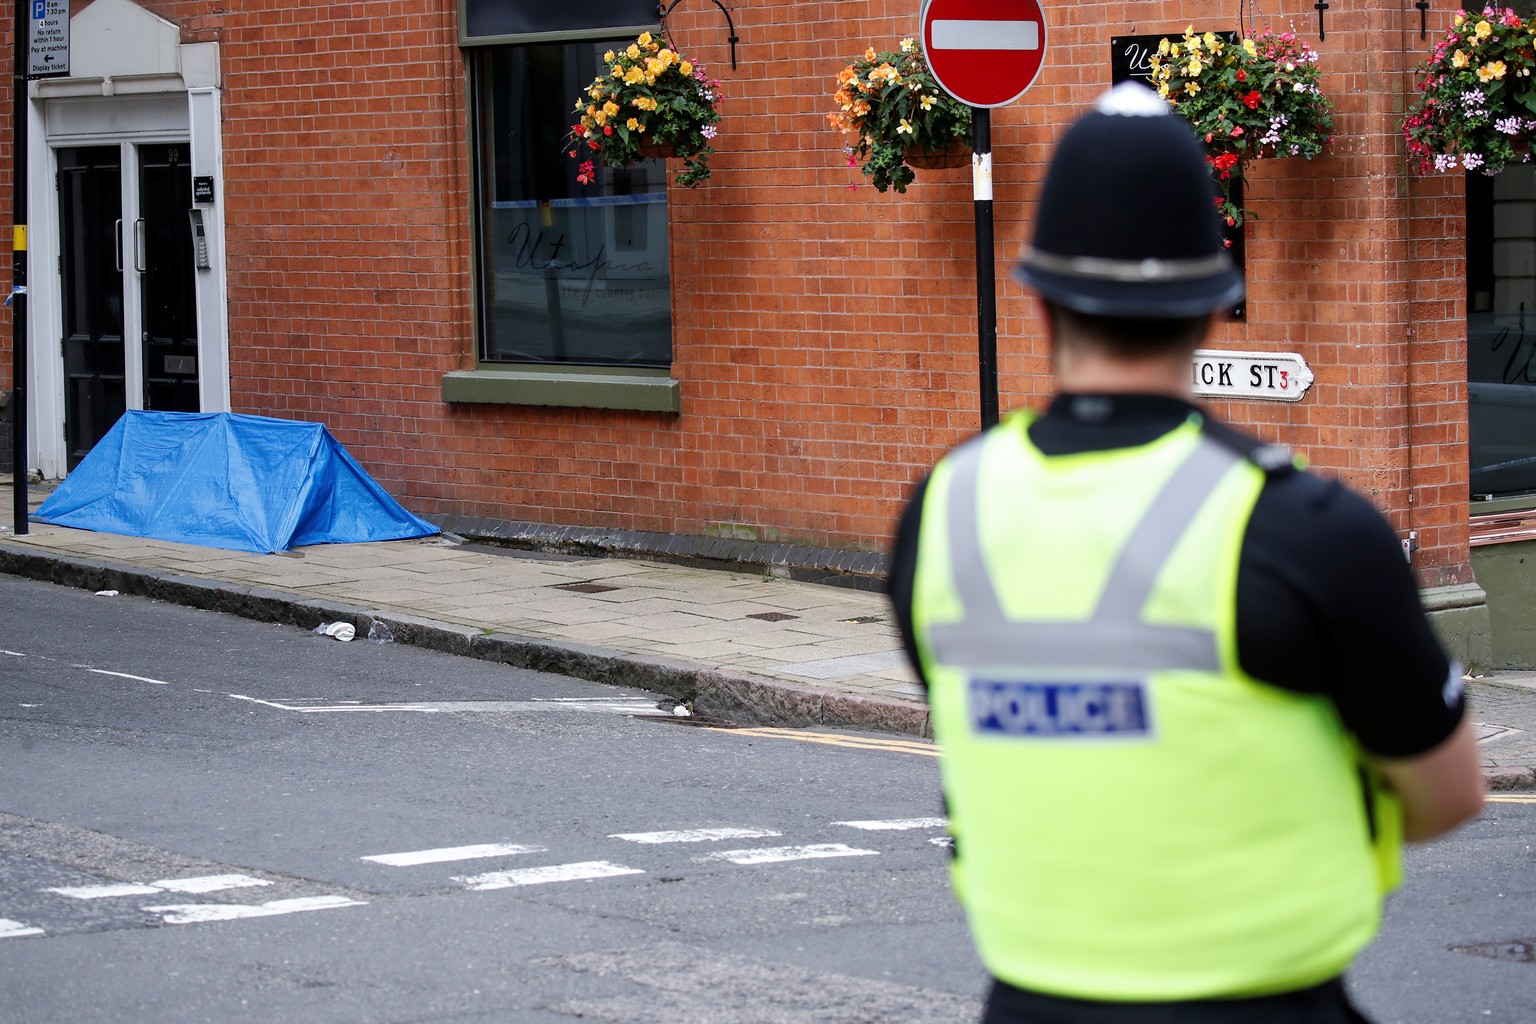 A police officer stands near the scene of reported stabbings in Birmingham, Britain, September 6, 2020. REUTERS/Phil Noble